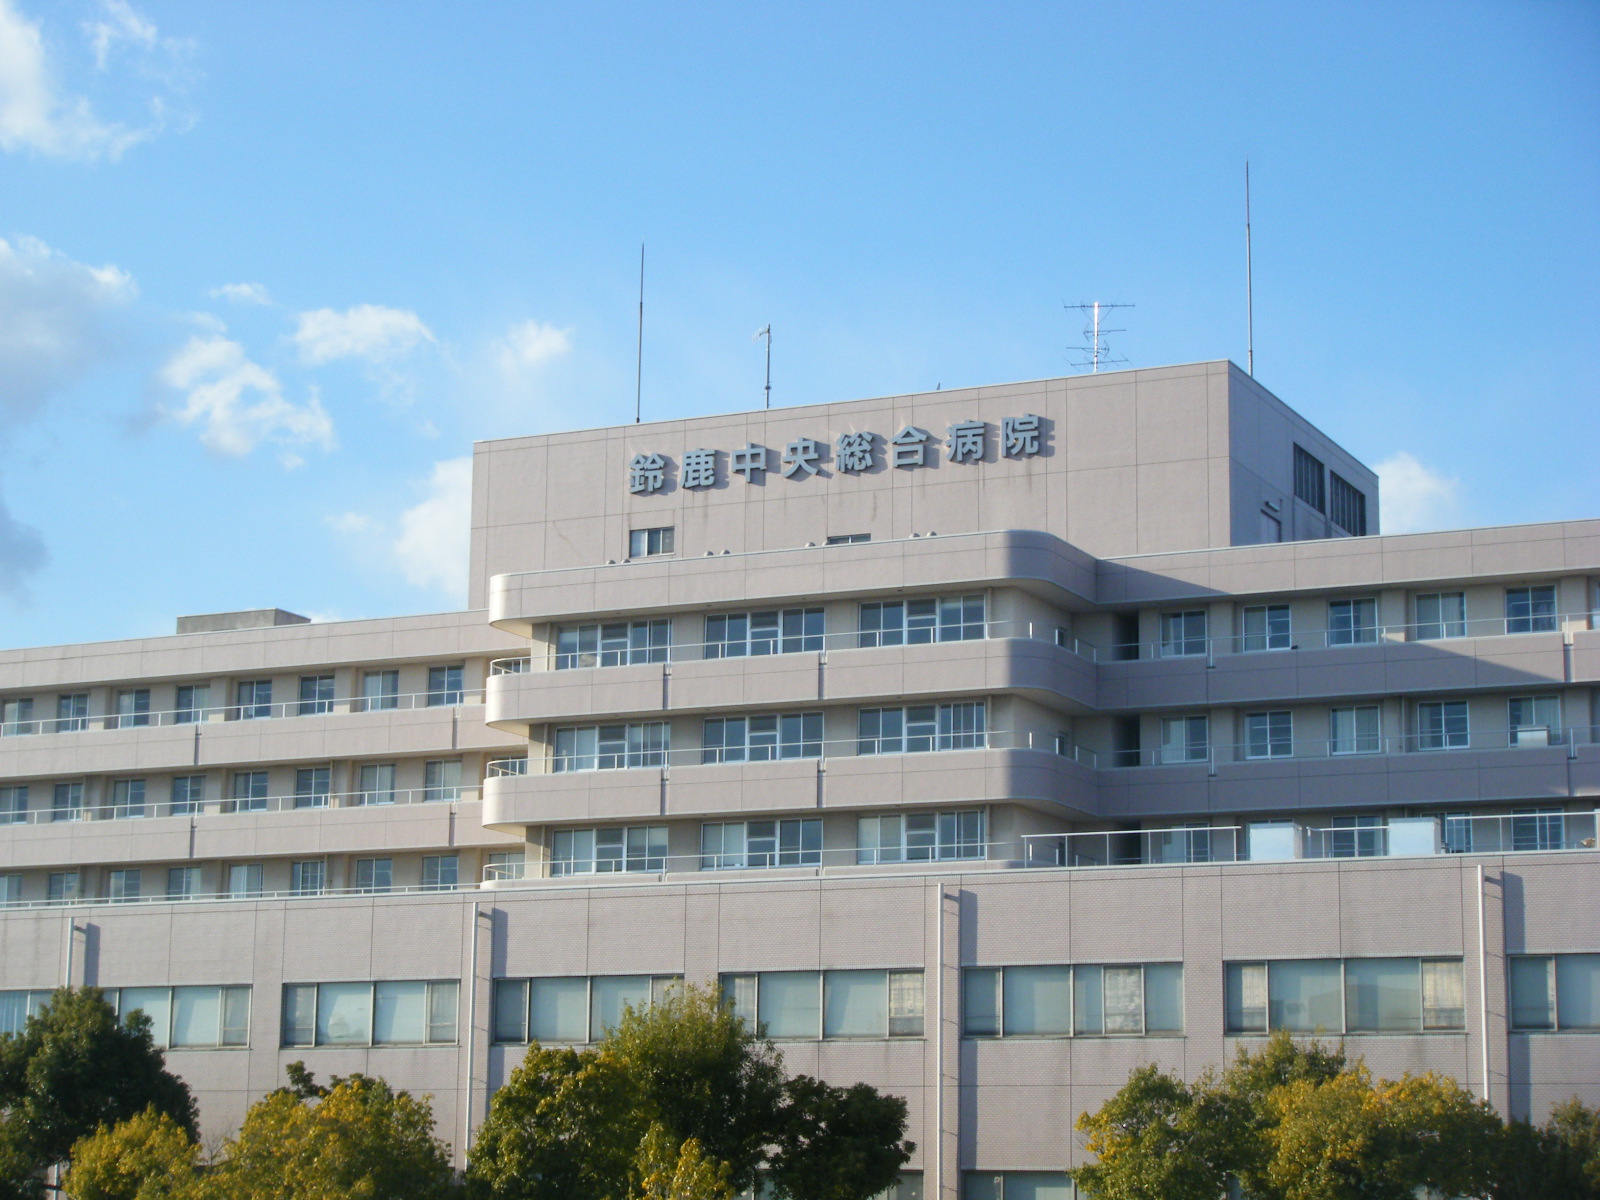 Hospital. 1612m to Mie Prefecture Welfare Federation of Agricultural Cooperatives Suzuka Central General Hospital (Hospital)